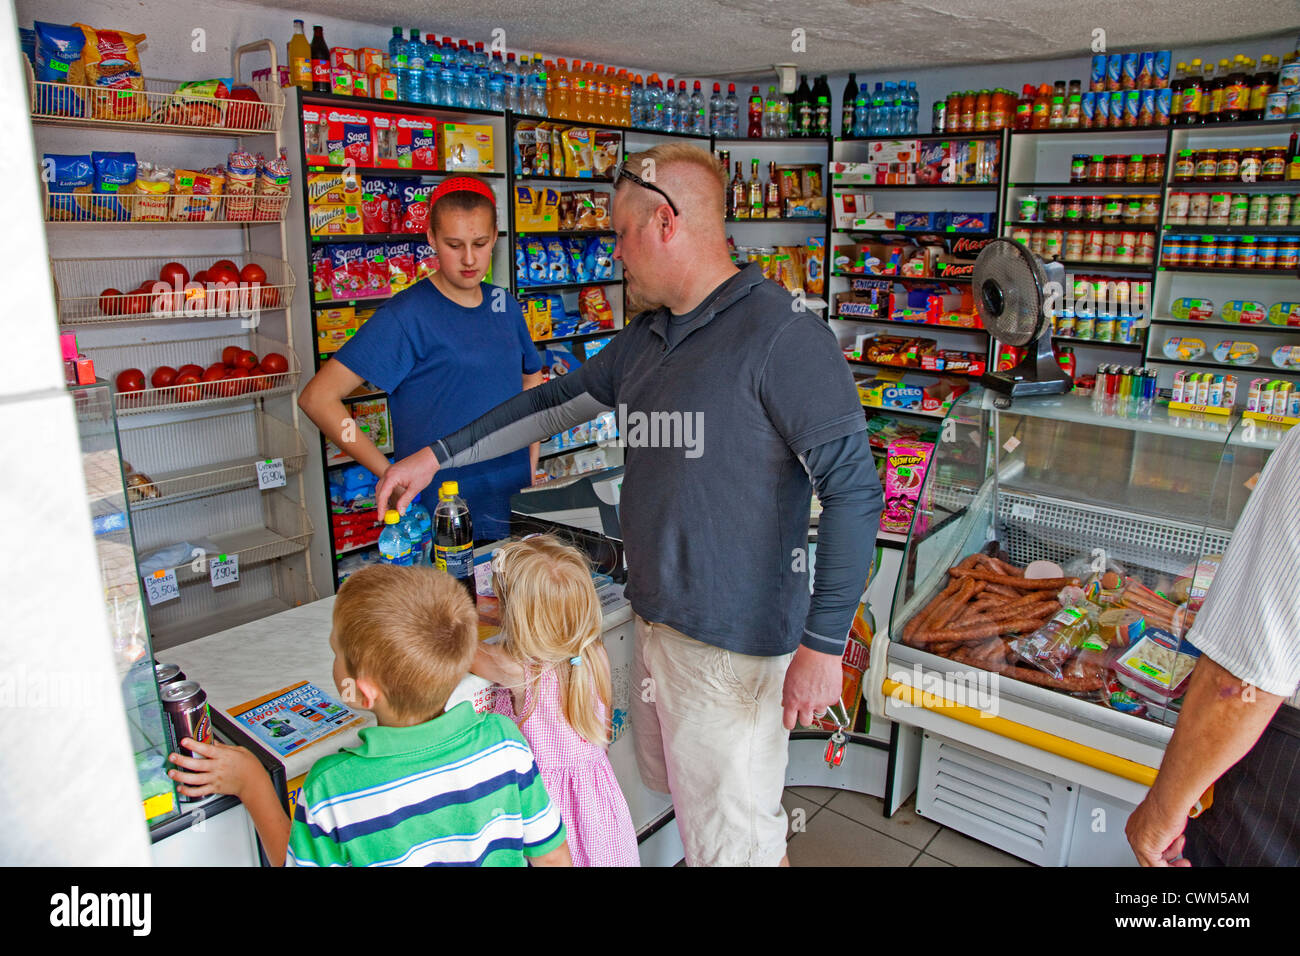 Purchasing water, cola and snacks at a small Polish convenience grocery store sklep. Krolowa Wola Central Poland Stock Photo